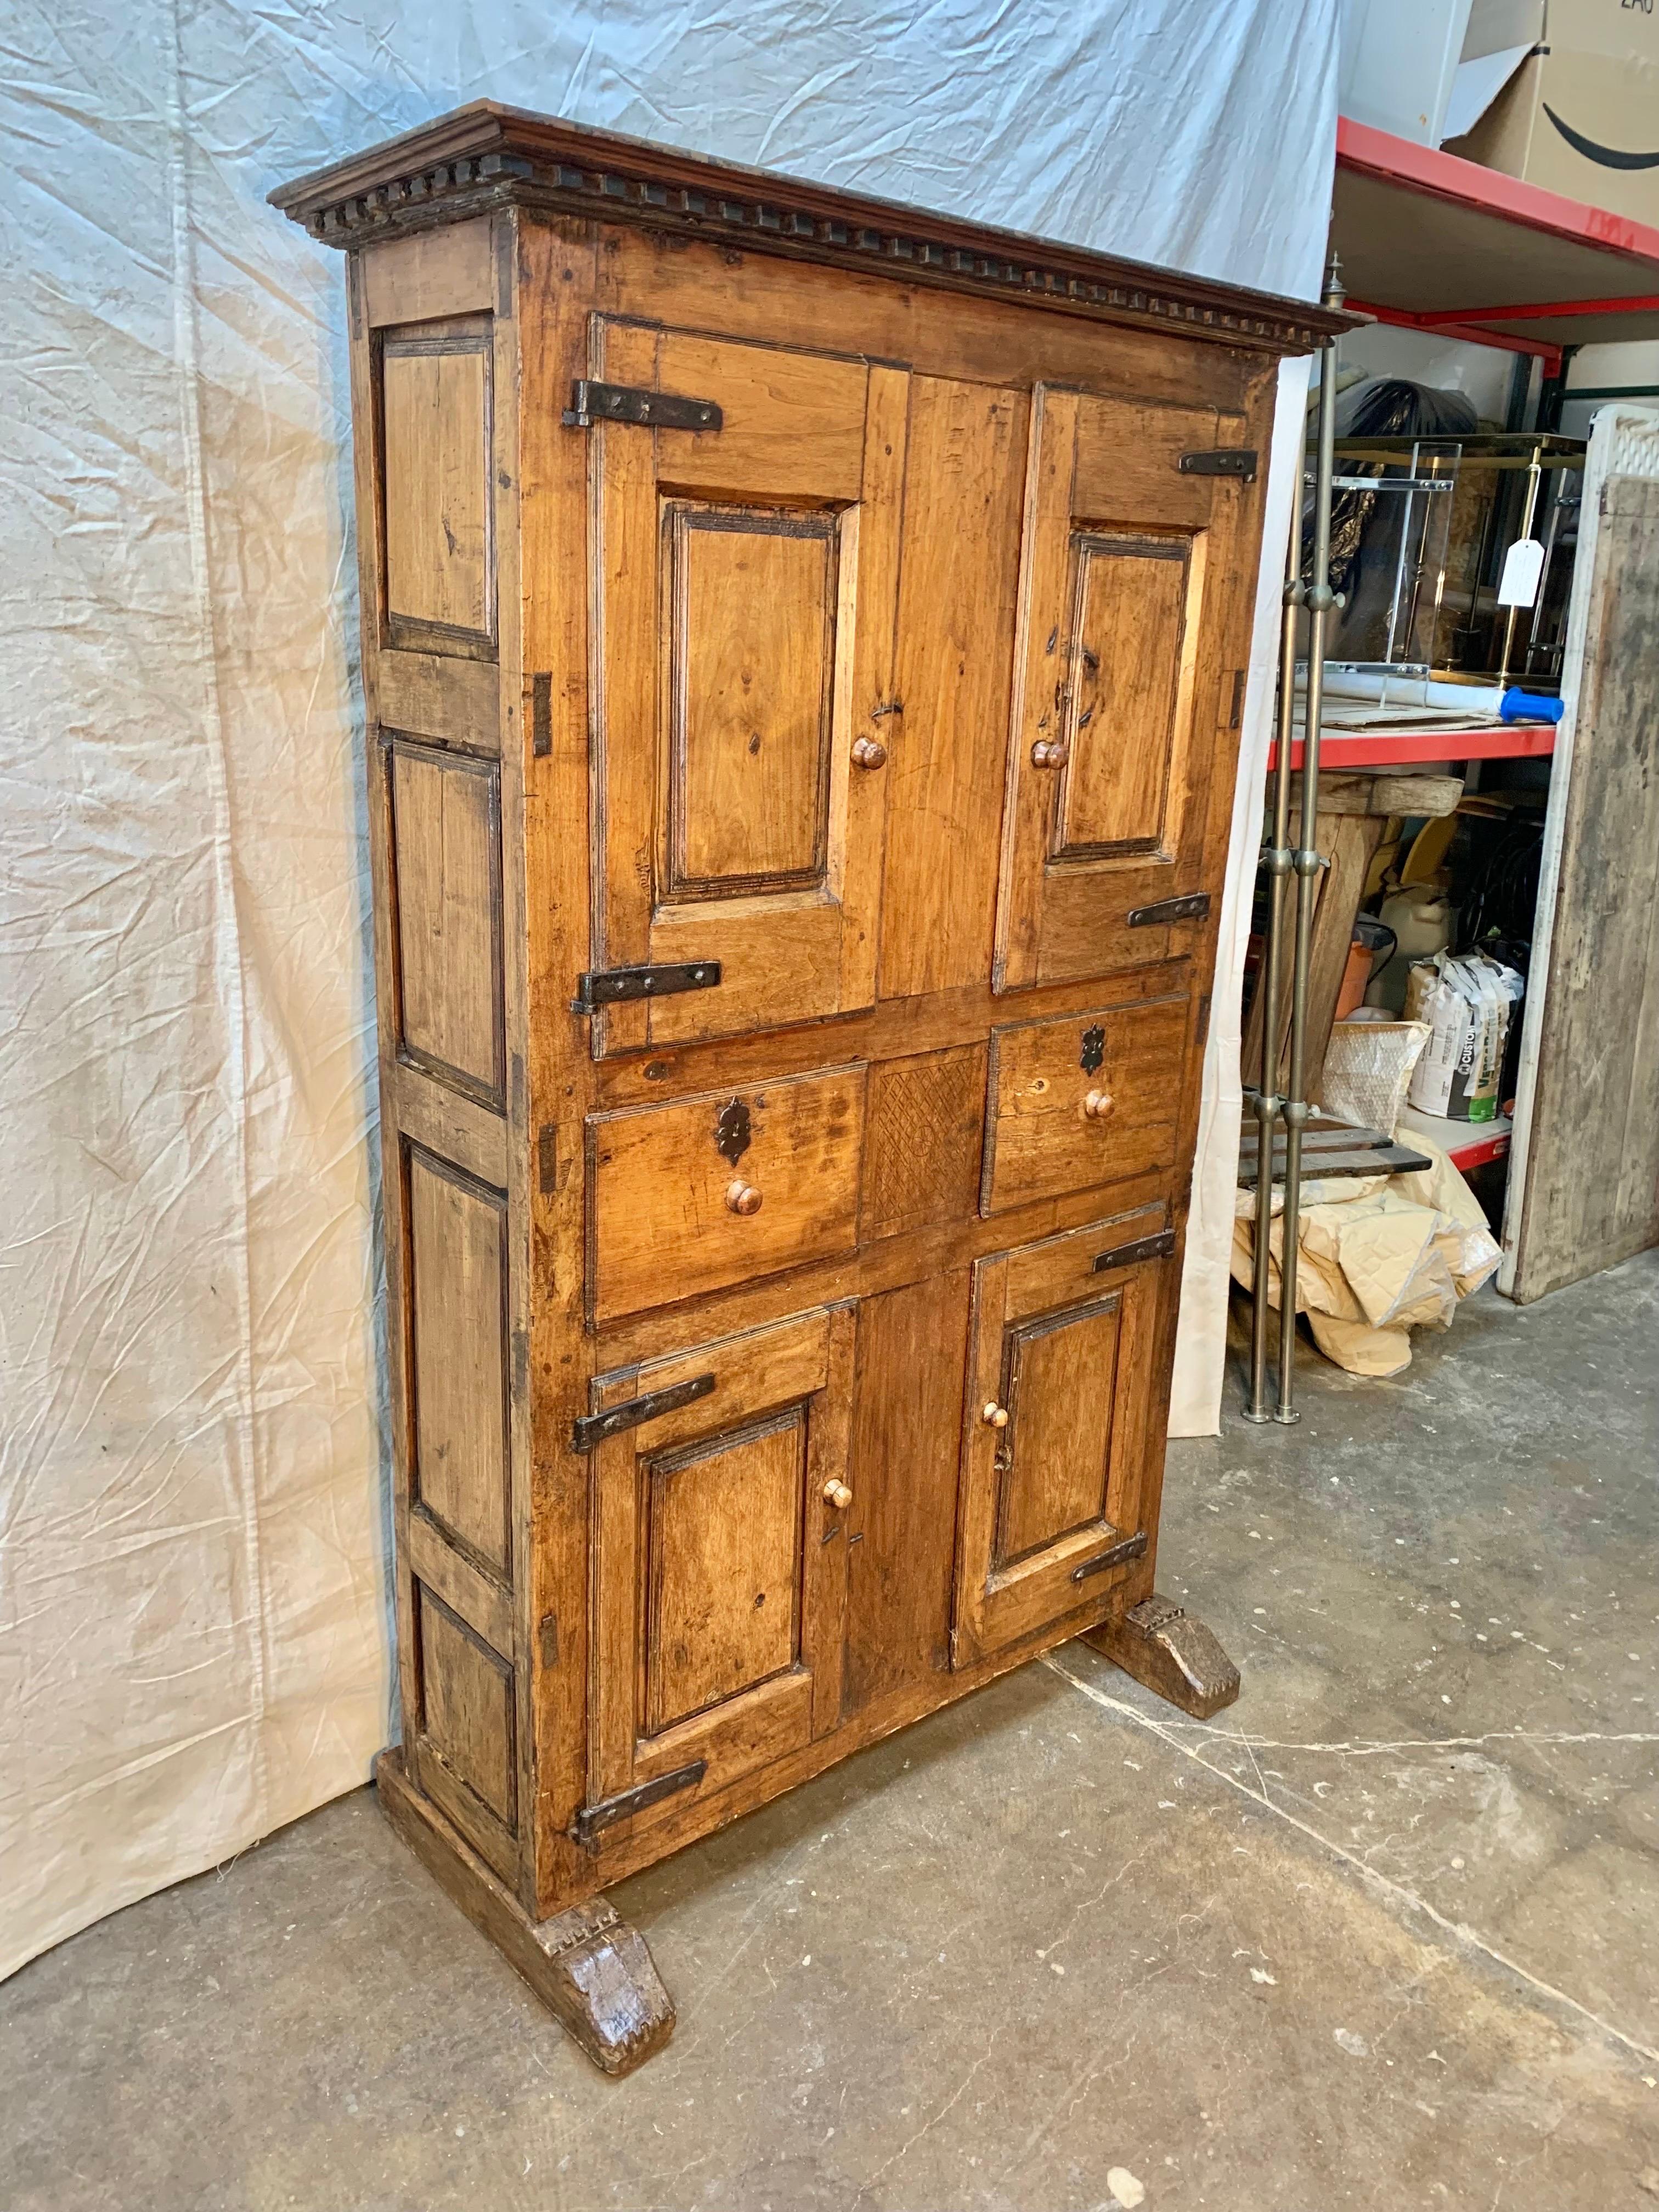 This 17th century Spanish Cabinet was hand carved from old growth walnut. The piece features a hand carved crown over 4 doors and two drawers all raised on hand carved sled feet. The upper and lower cabinet doors have the original hand forged iron